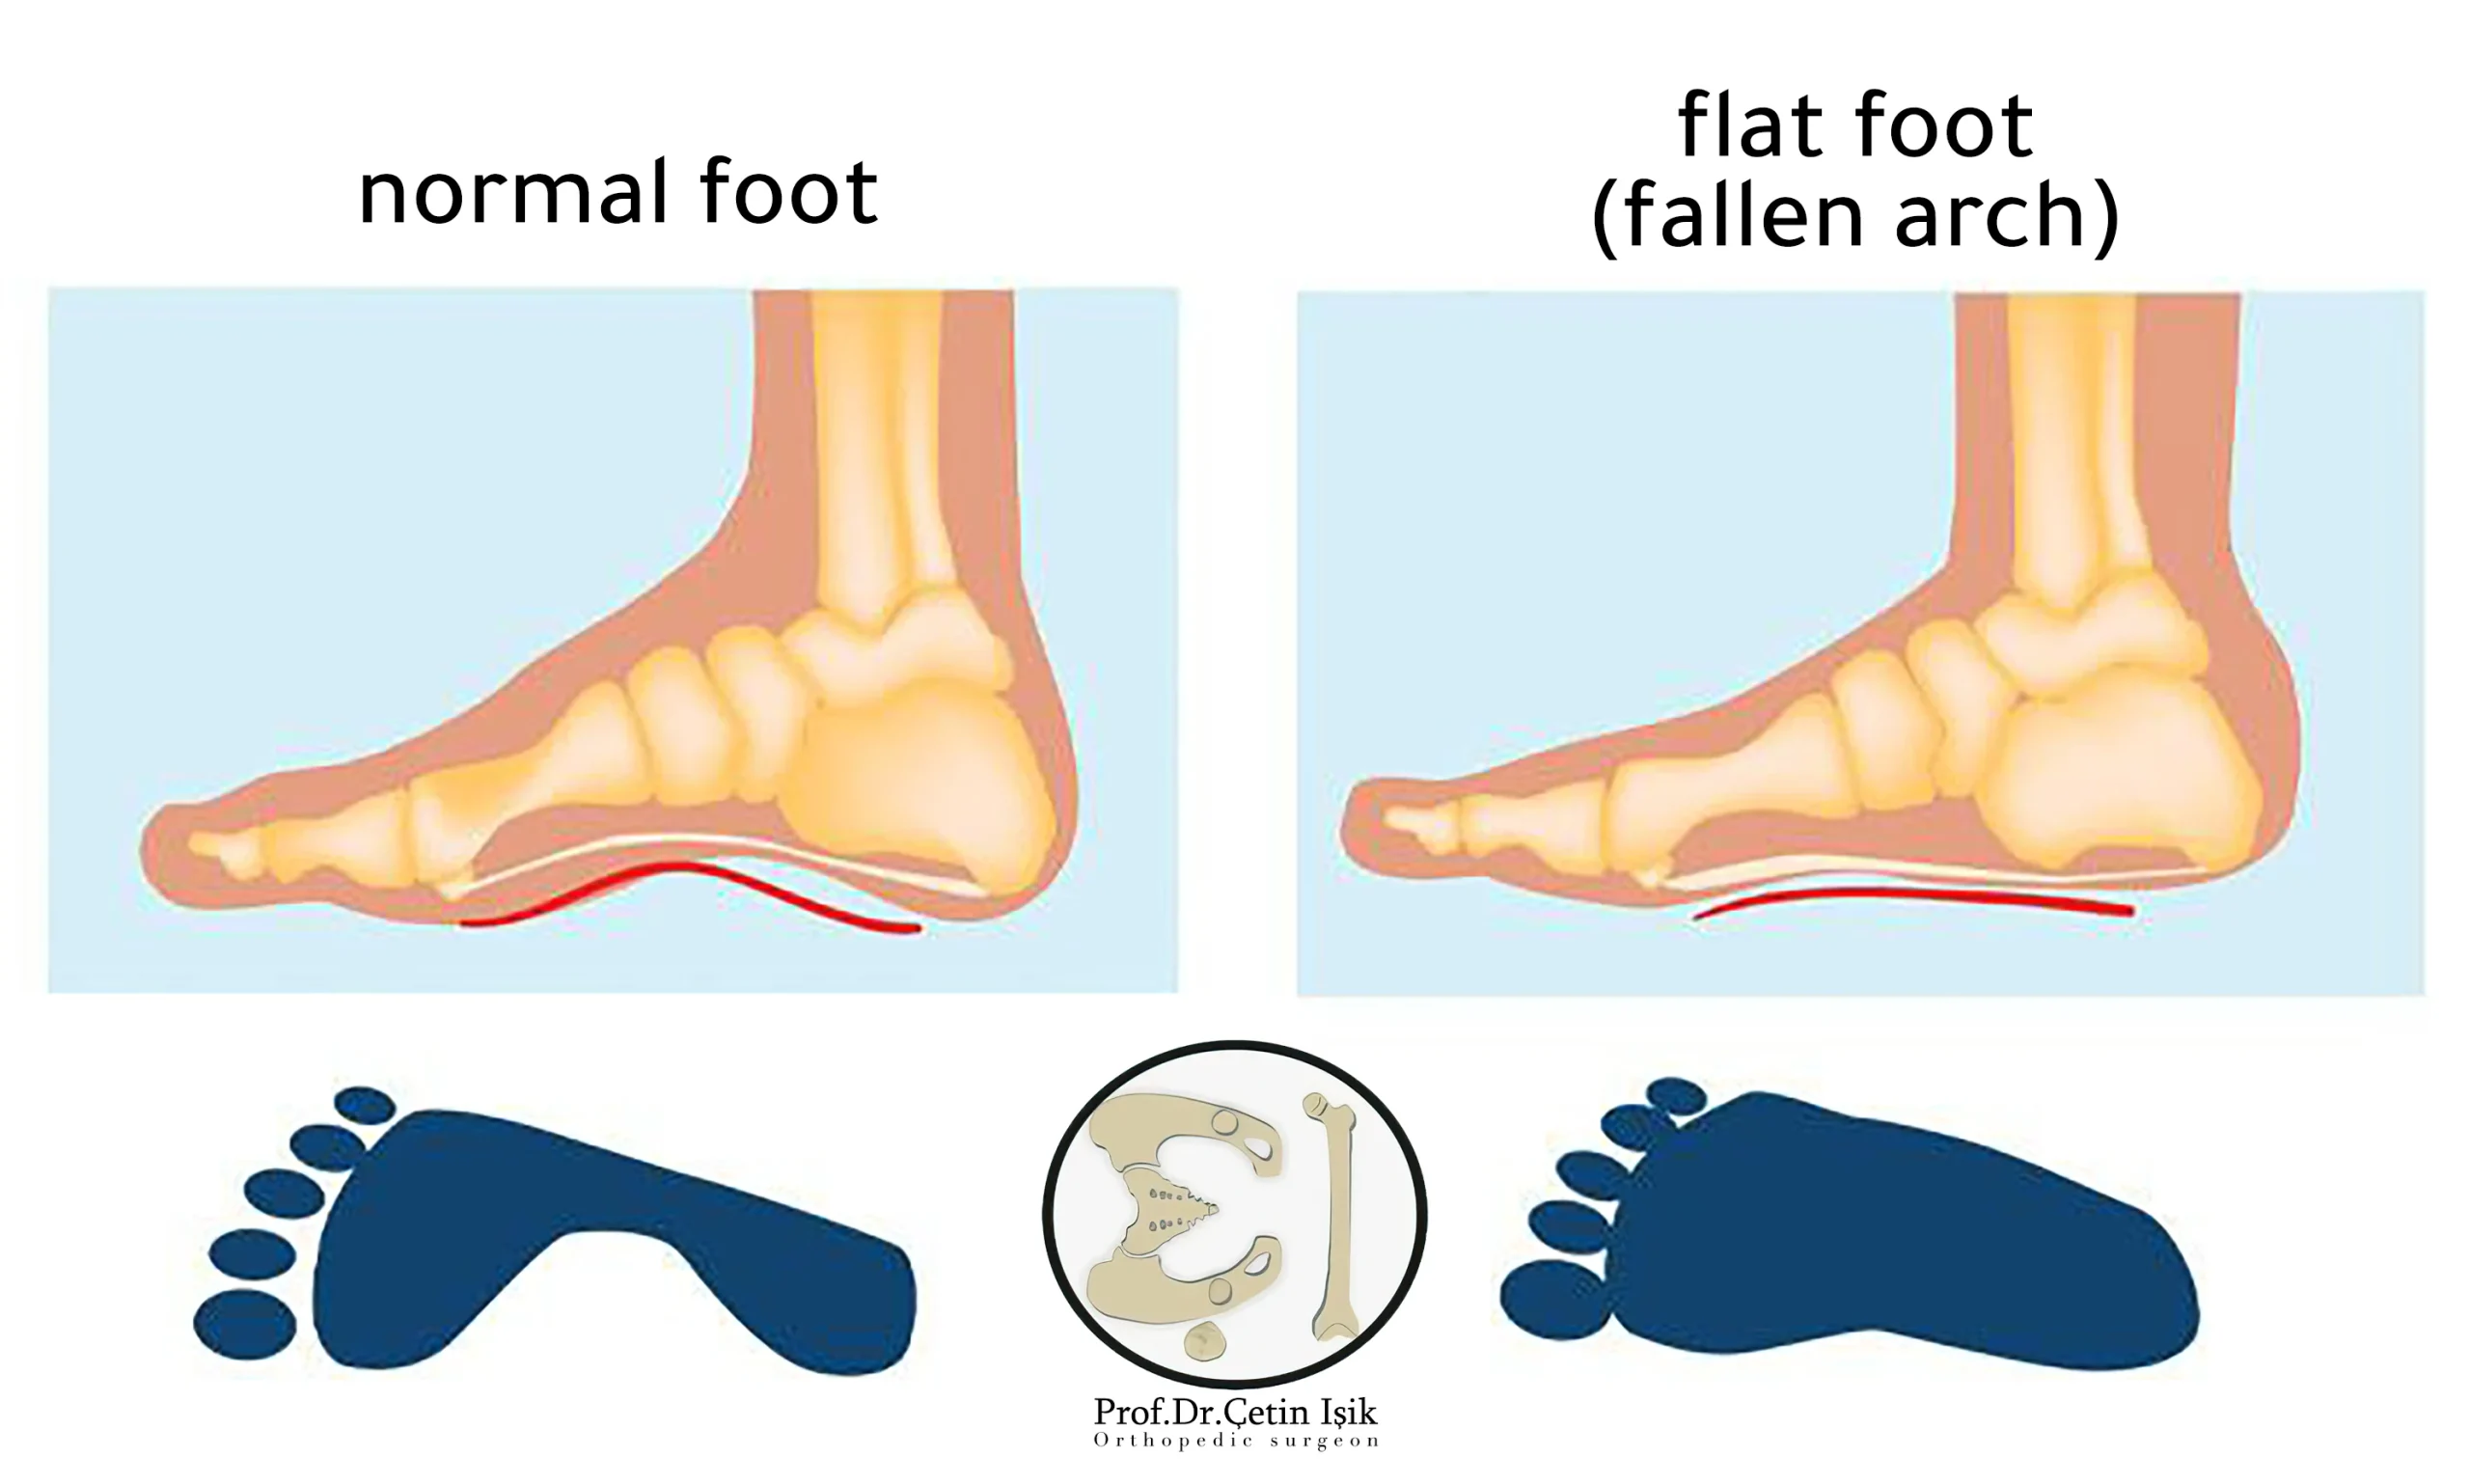 The difference between normal foot and flat foot and their footprint